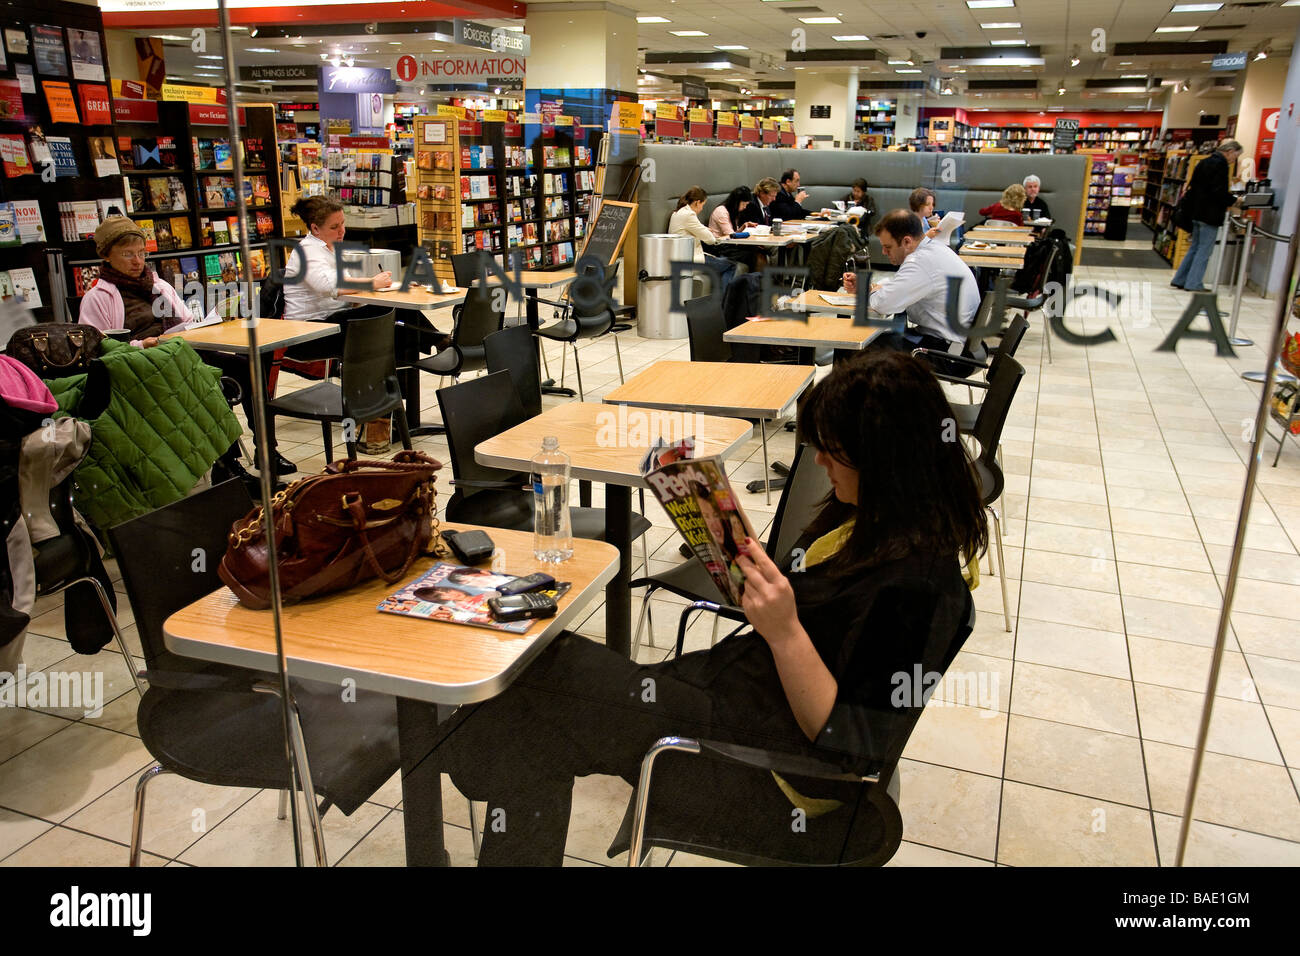 United States, New York, Time Warner Center, Dean and Deluca Cafe in Borders Books and Music Store, Young Lady reading a Stock Photo